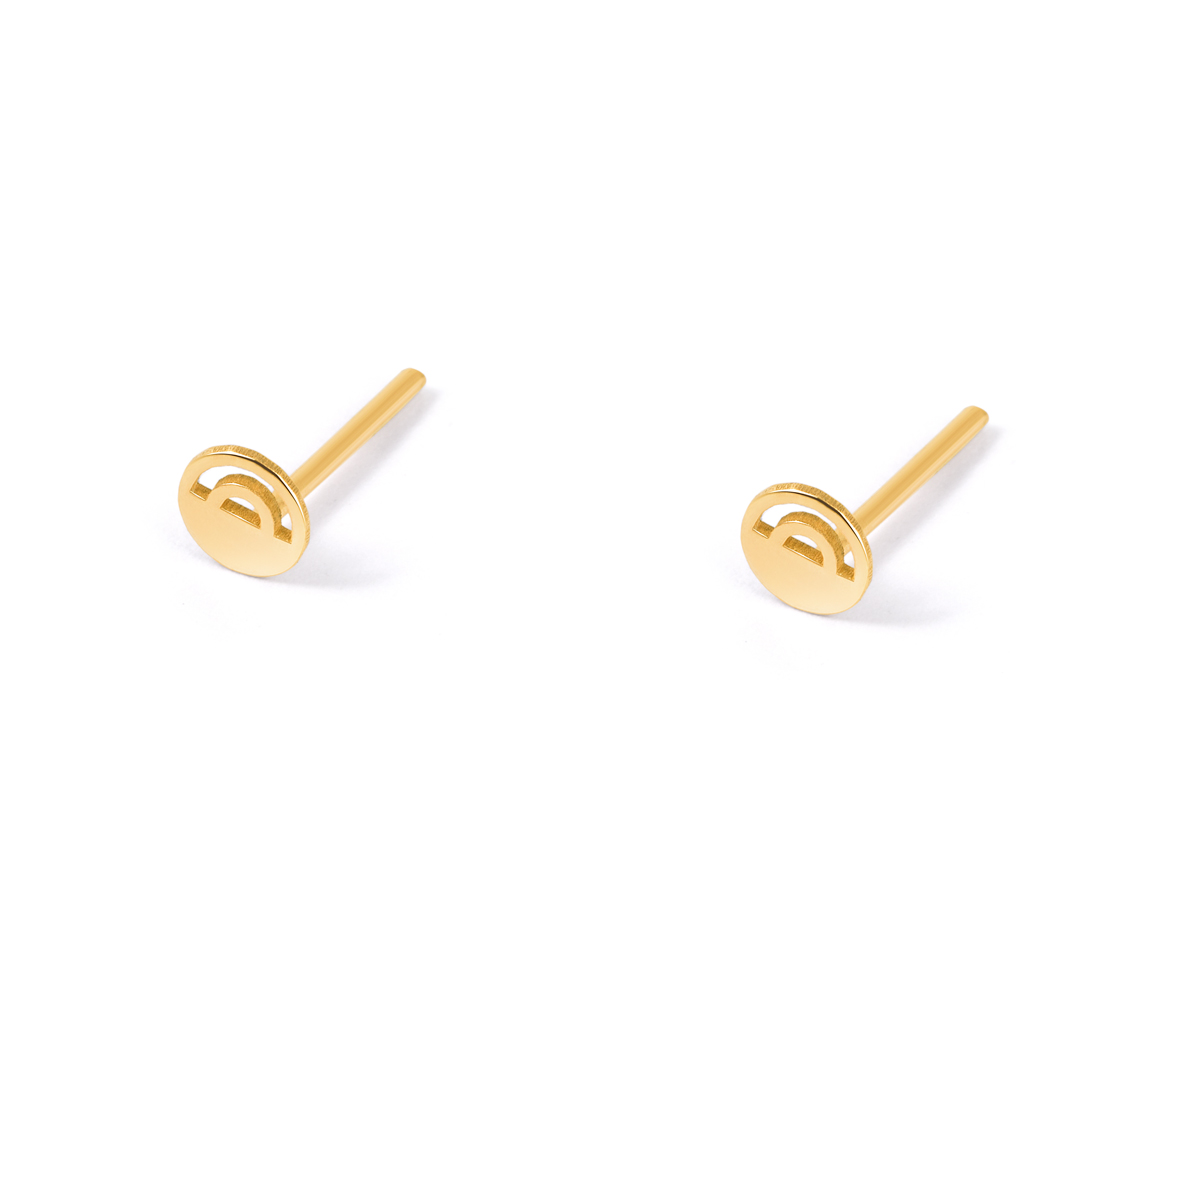 A small gold earrings g